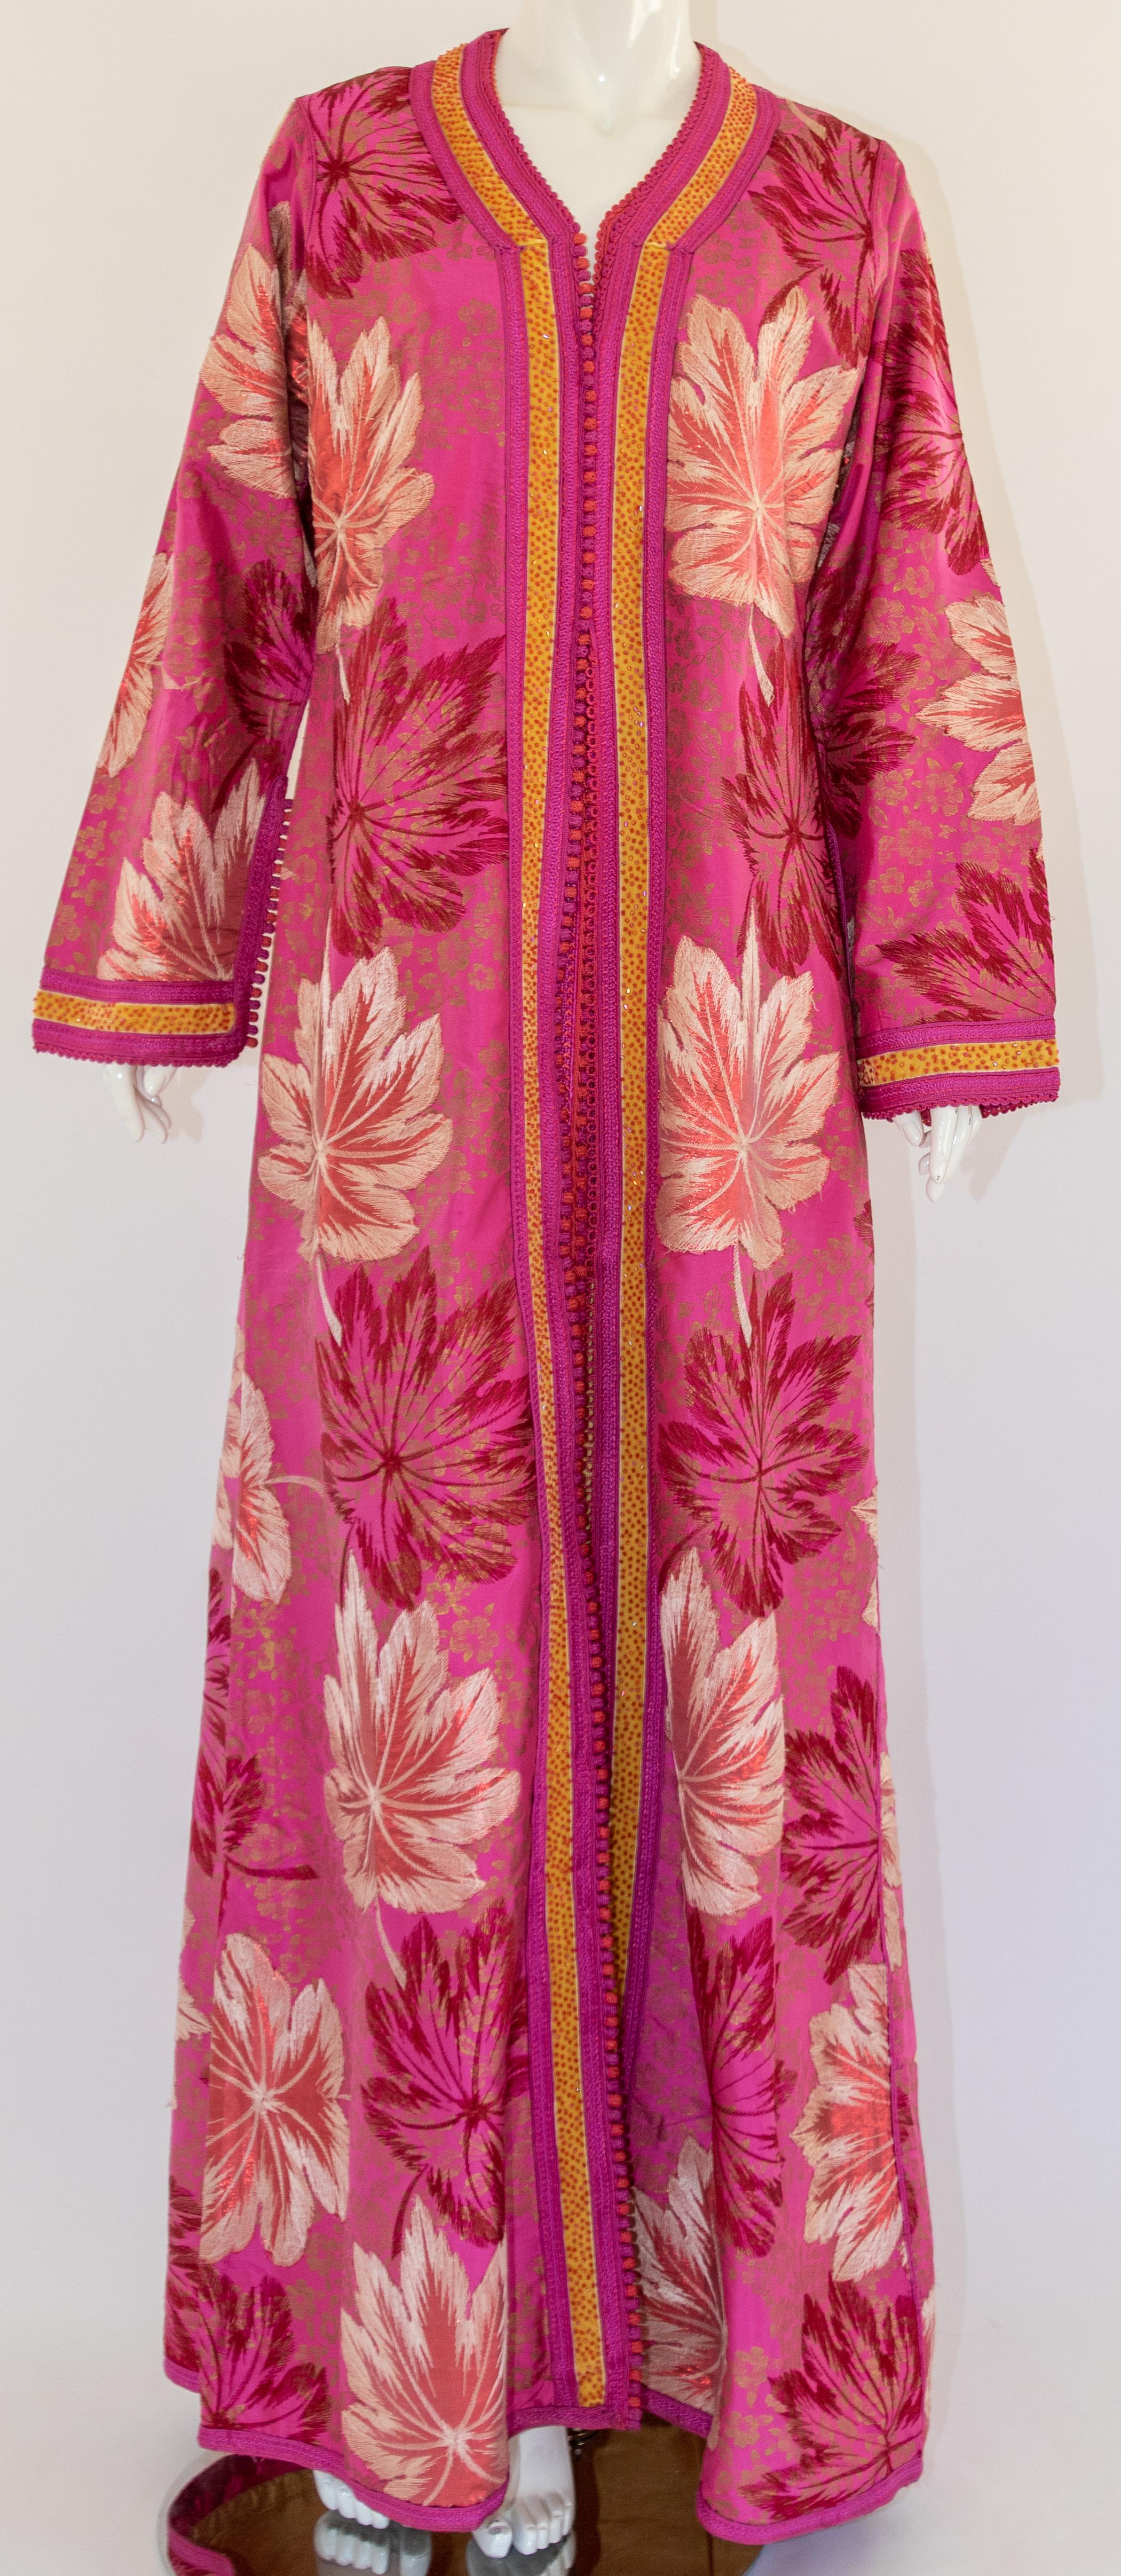 Elegant vintage brocade Moroccan kaftan, embroidered with pink and gold.
This chic Gypsy Bohemian maxi dress brocade kaftan is embroidered and embellished with handwoven thread pink and gold trim. 
It is a slip on, the button does not open, it has